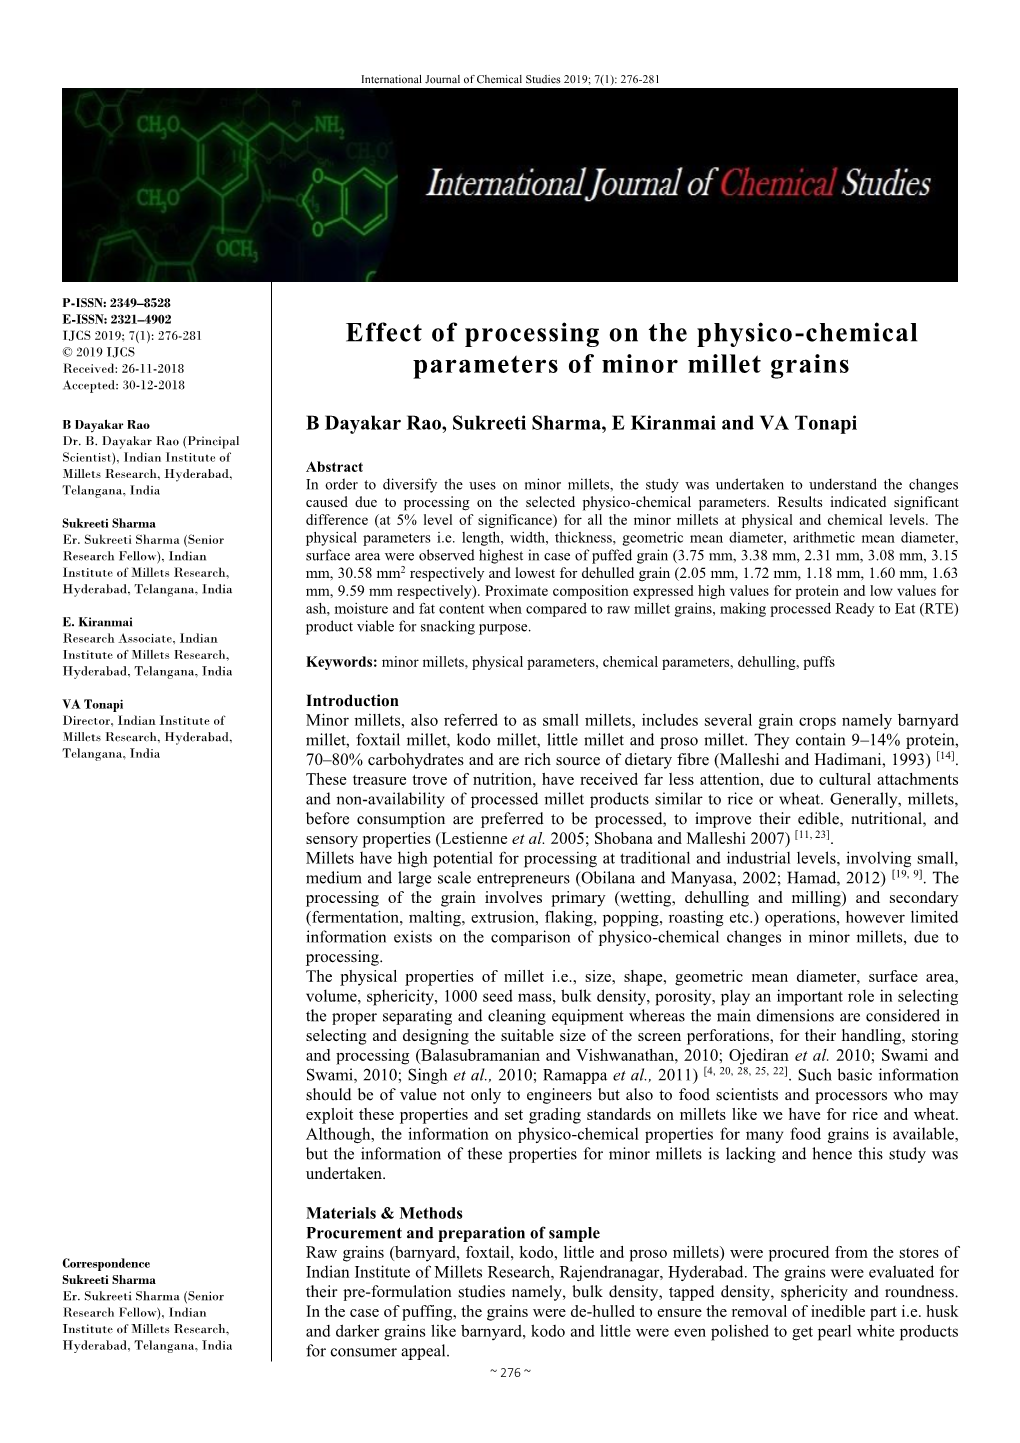 Effect of Processing on the Physico-Chemical Parameters of Minor Millet Grains